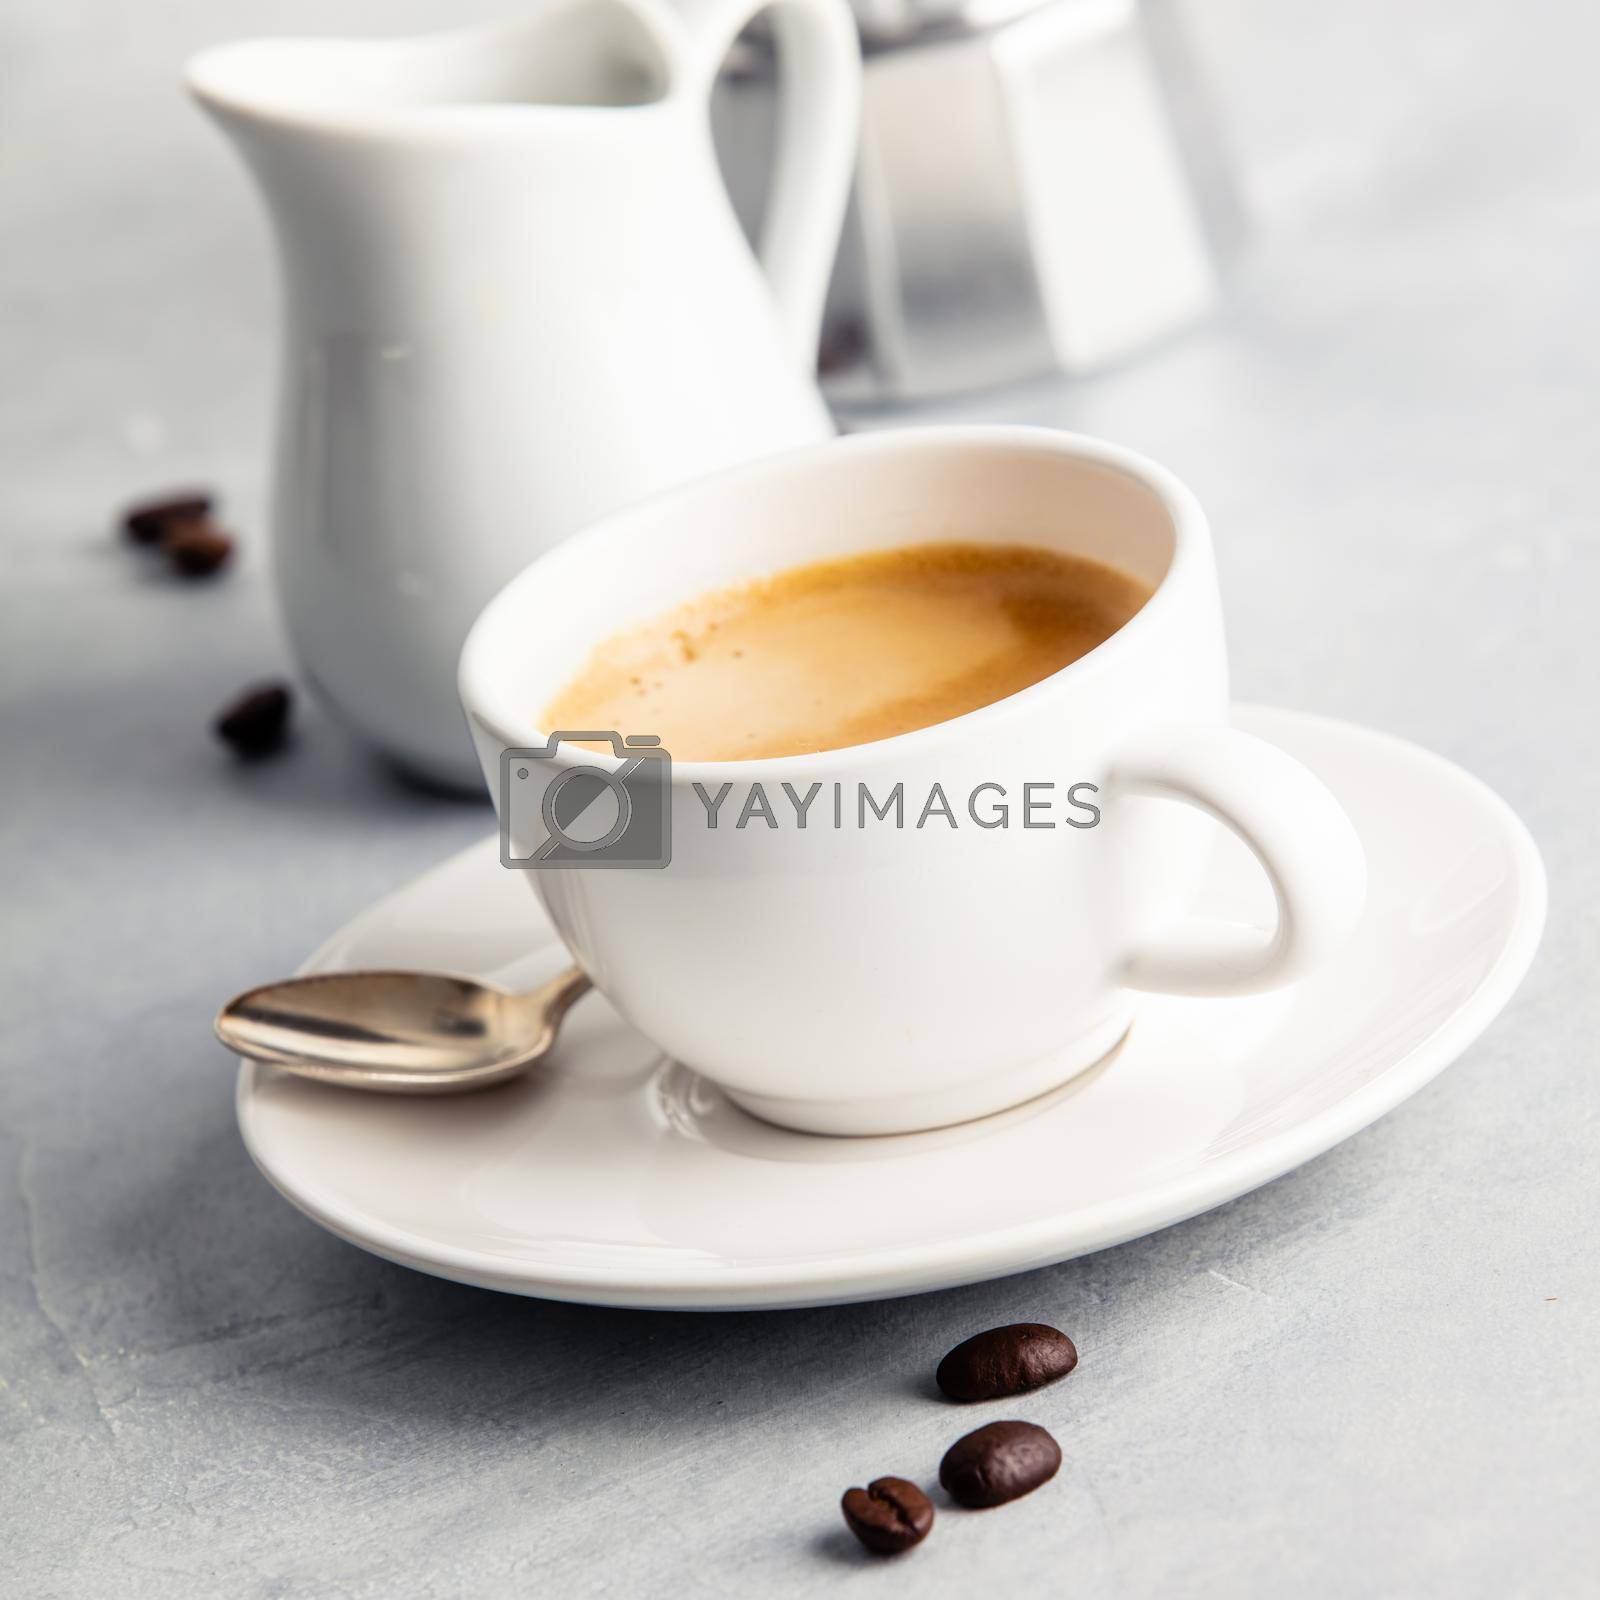 Royalty free image of Coffee espresso in white cup with milk and coffee maker by klenova